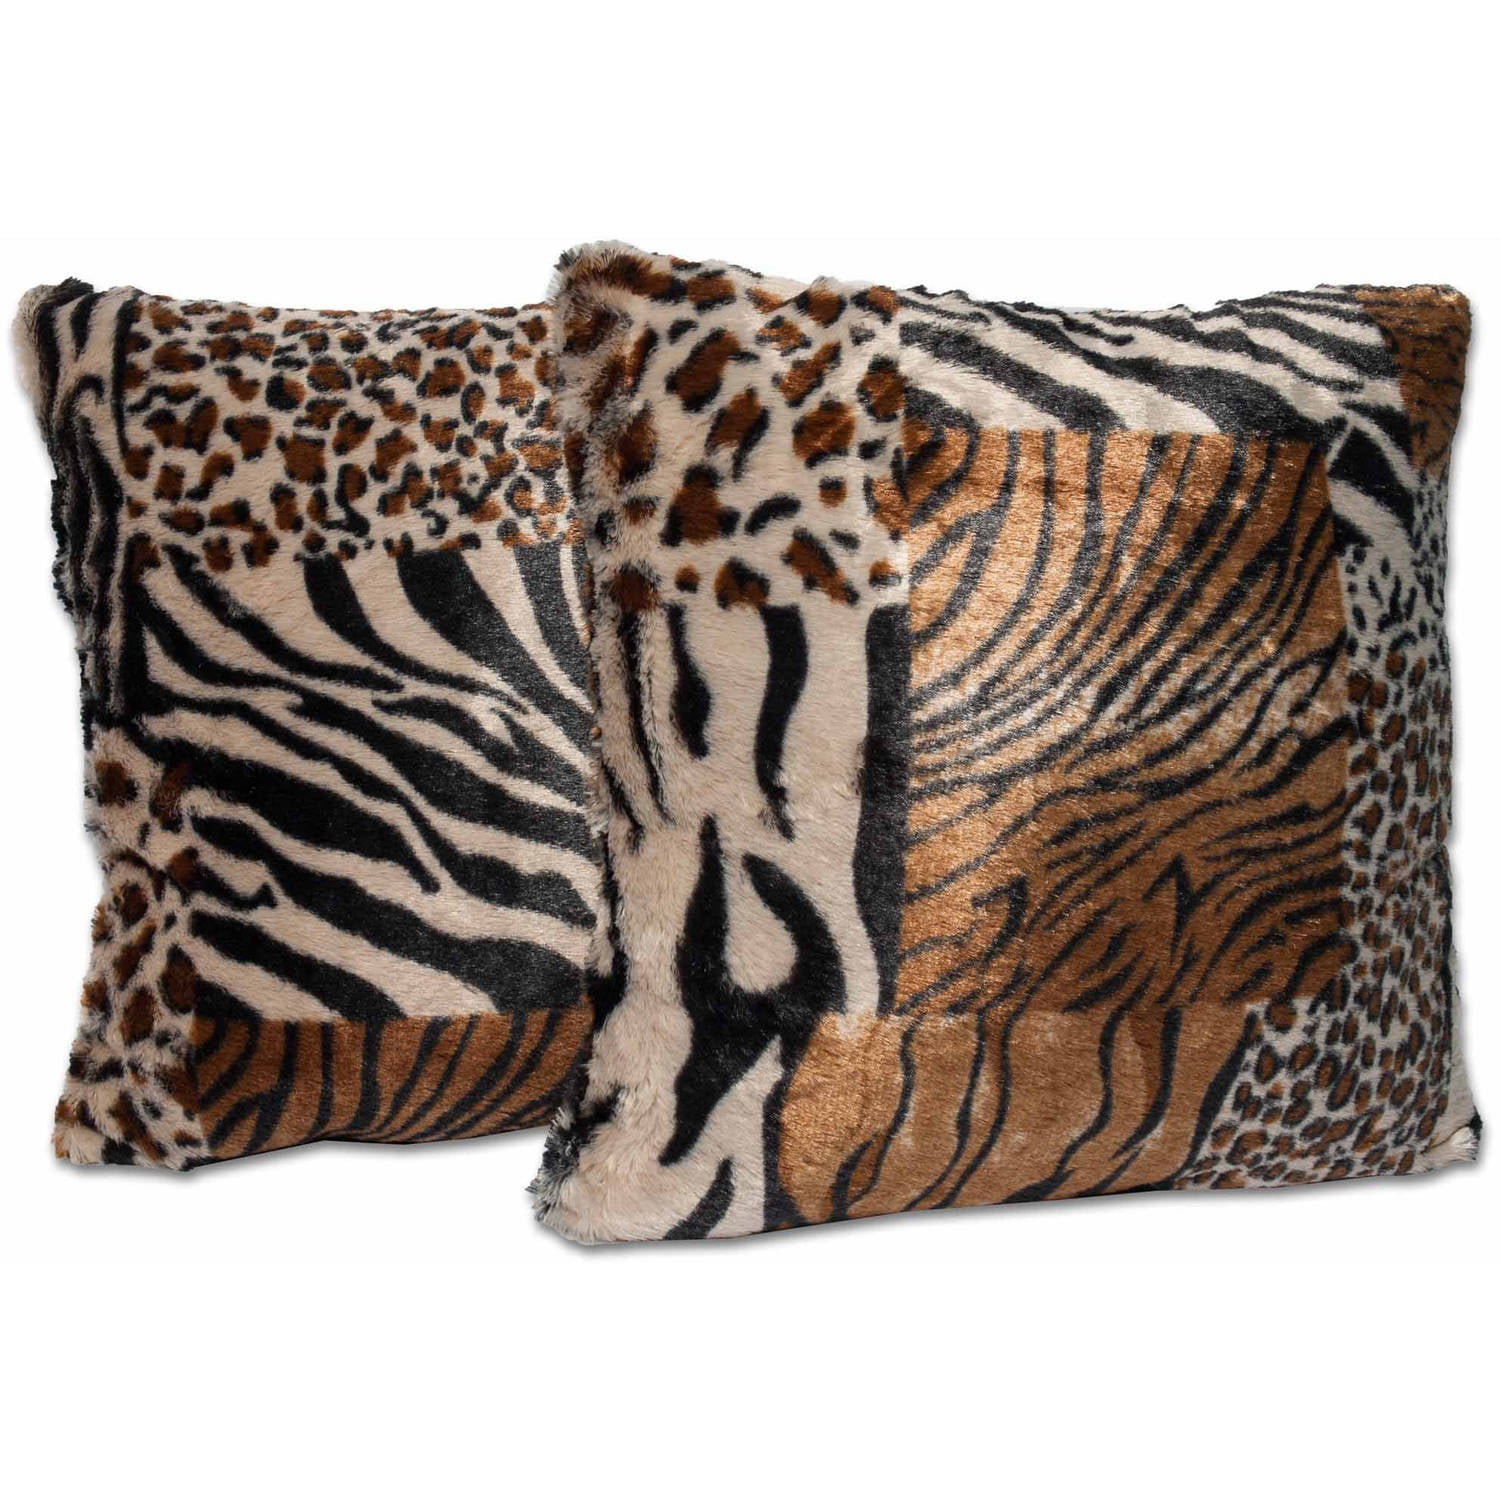 Multicolor Tiger Indie Design Easy Cool Distressed Tiger Roar Trendy Animal Print Throw Pillow 18x18 